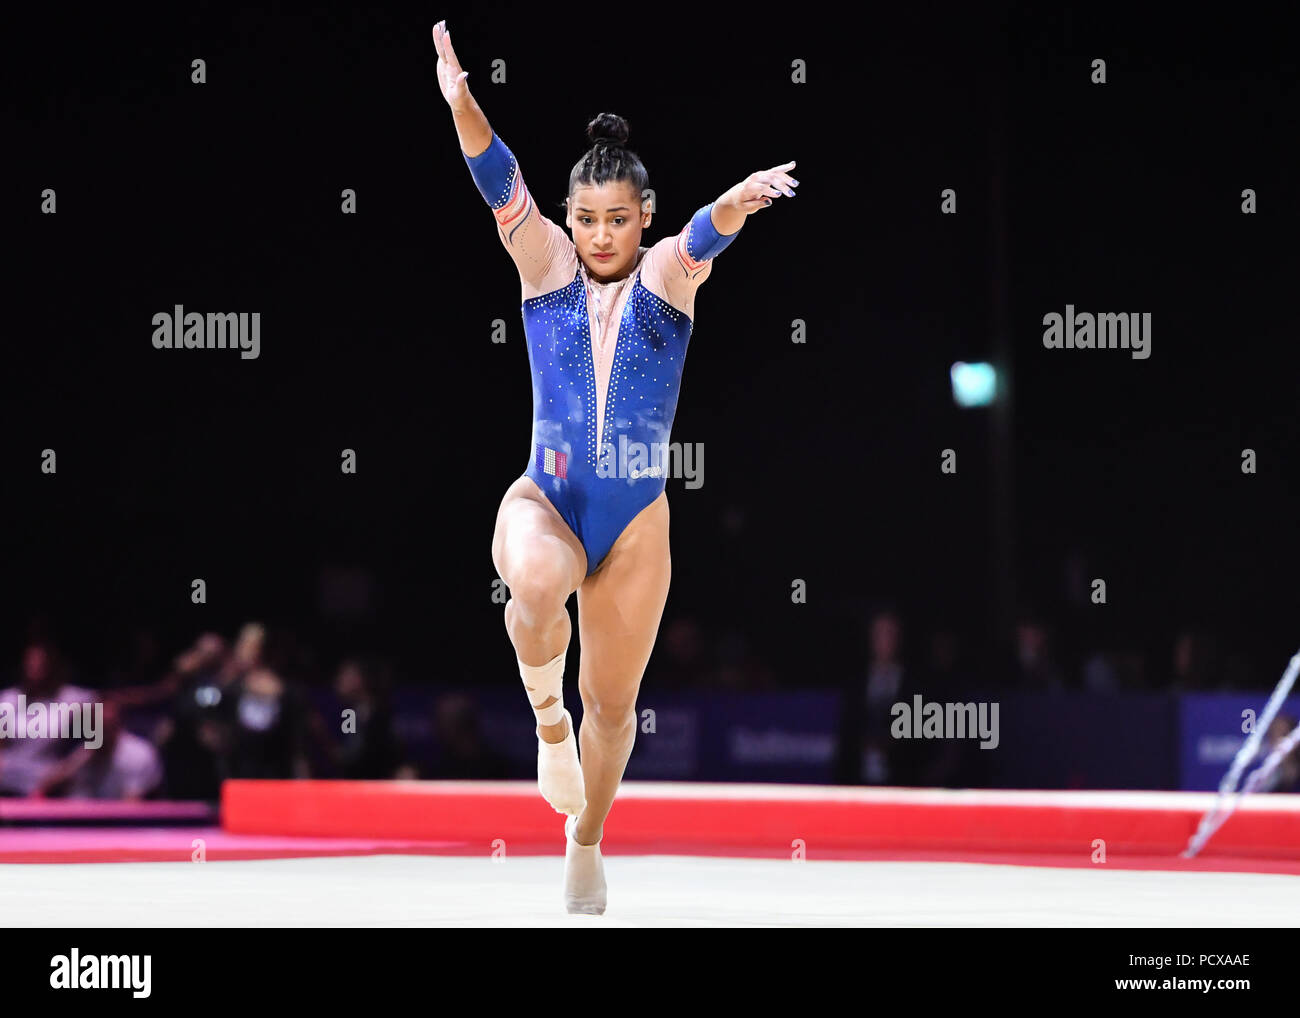 Glasgow, UK, 4 Aug 2018. BOYER Marina (FRA) competes on Floor in Women's Artistic Gymnastics Team Final during the European Championships Glasgow 2018 at The SSE Hydro on Saturday, 04 August 2018. GLASGOW SCOTLAND . Credit: Taka G Wu Credit: Taka Wu/Alamy Live News Stock Photo